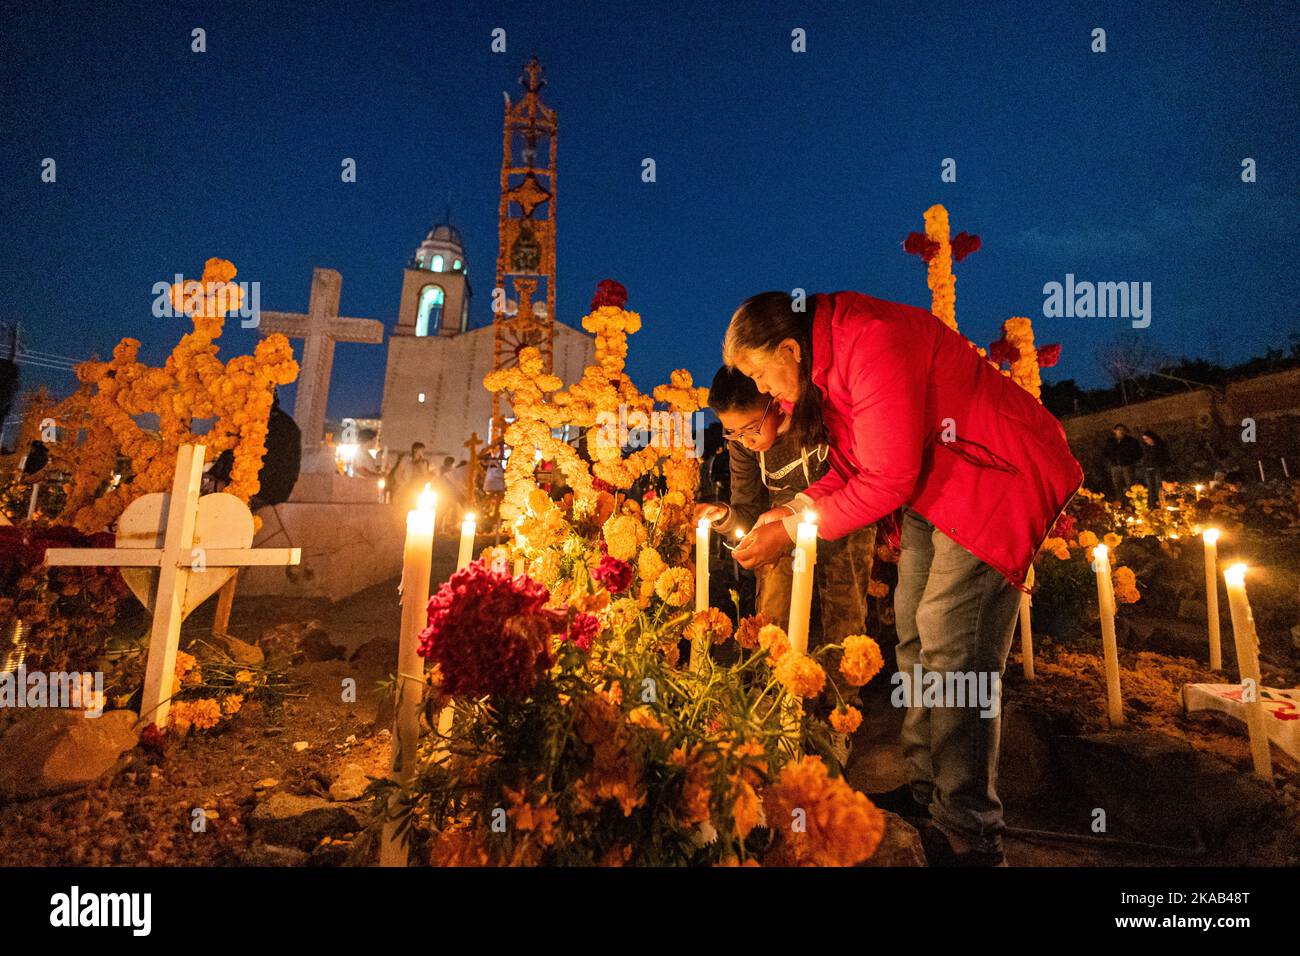 Morelia, Mexico, 1 Nov 2022, Mother and son light candles during the Day of the Dead celebration in the cemetery of Arocutin, Michoacan, Mexico. The indigenous Purepecha of this village prepare this annual ritual of remembrance by constructing altars with marigolds, candles and the favorite food or drink of the deceased.  The vigil takes place the night of November 1st and has become a major tourist attraction in the central Mexican state of Michoacan.  Brian Overcast/Alamy Live News Stock Photo